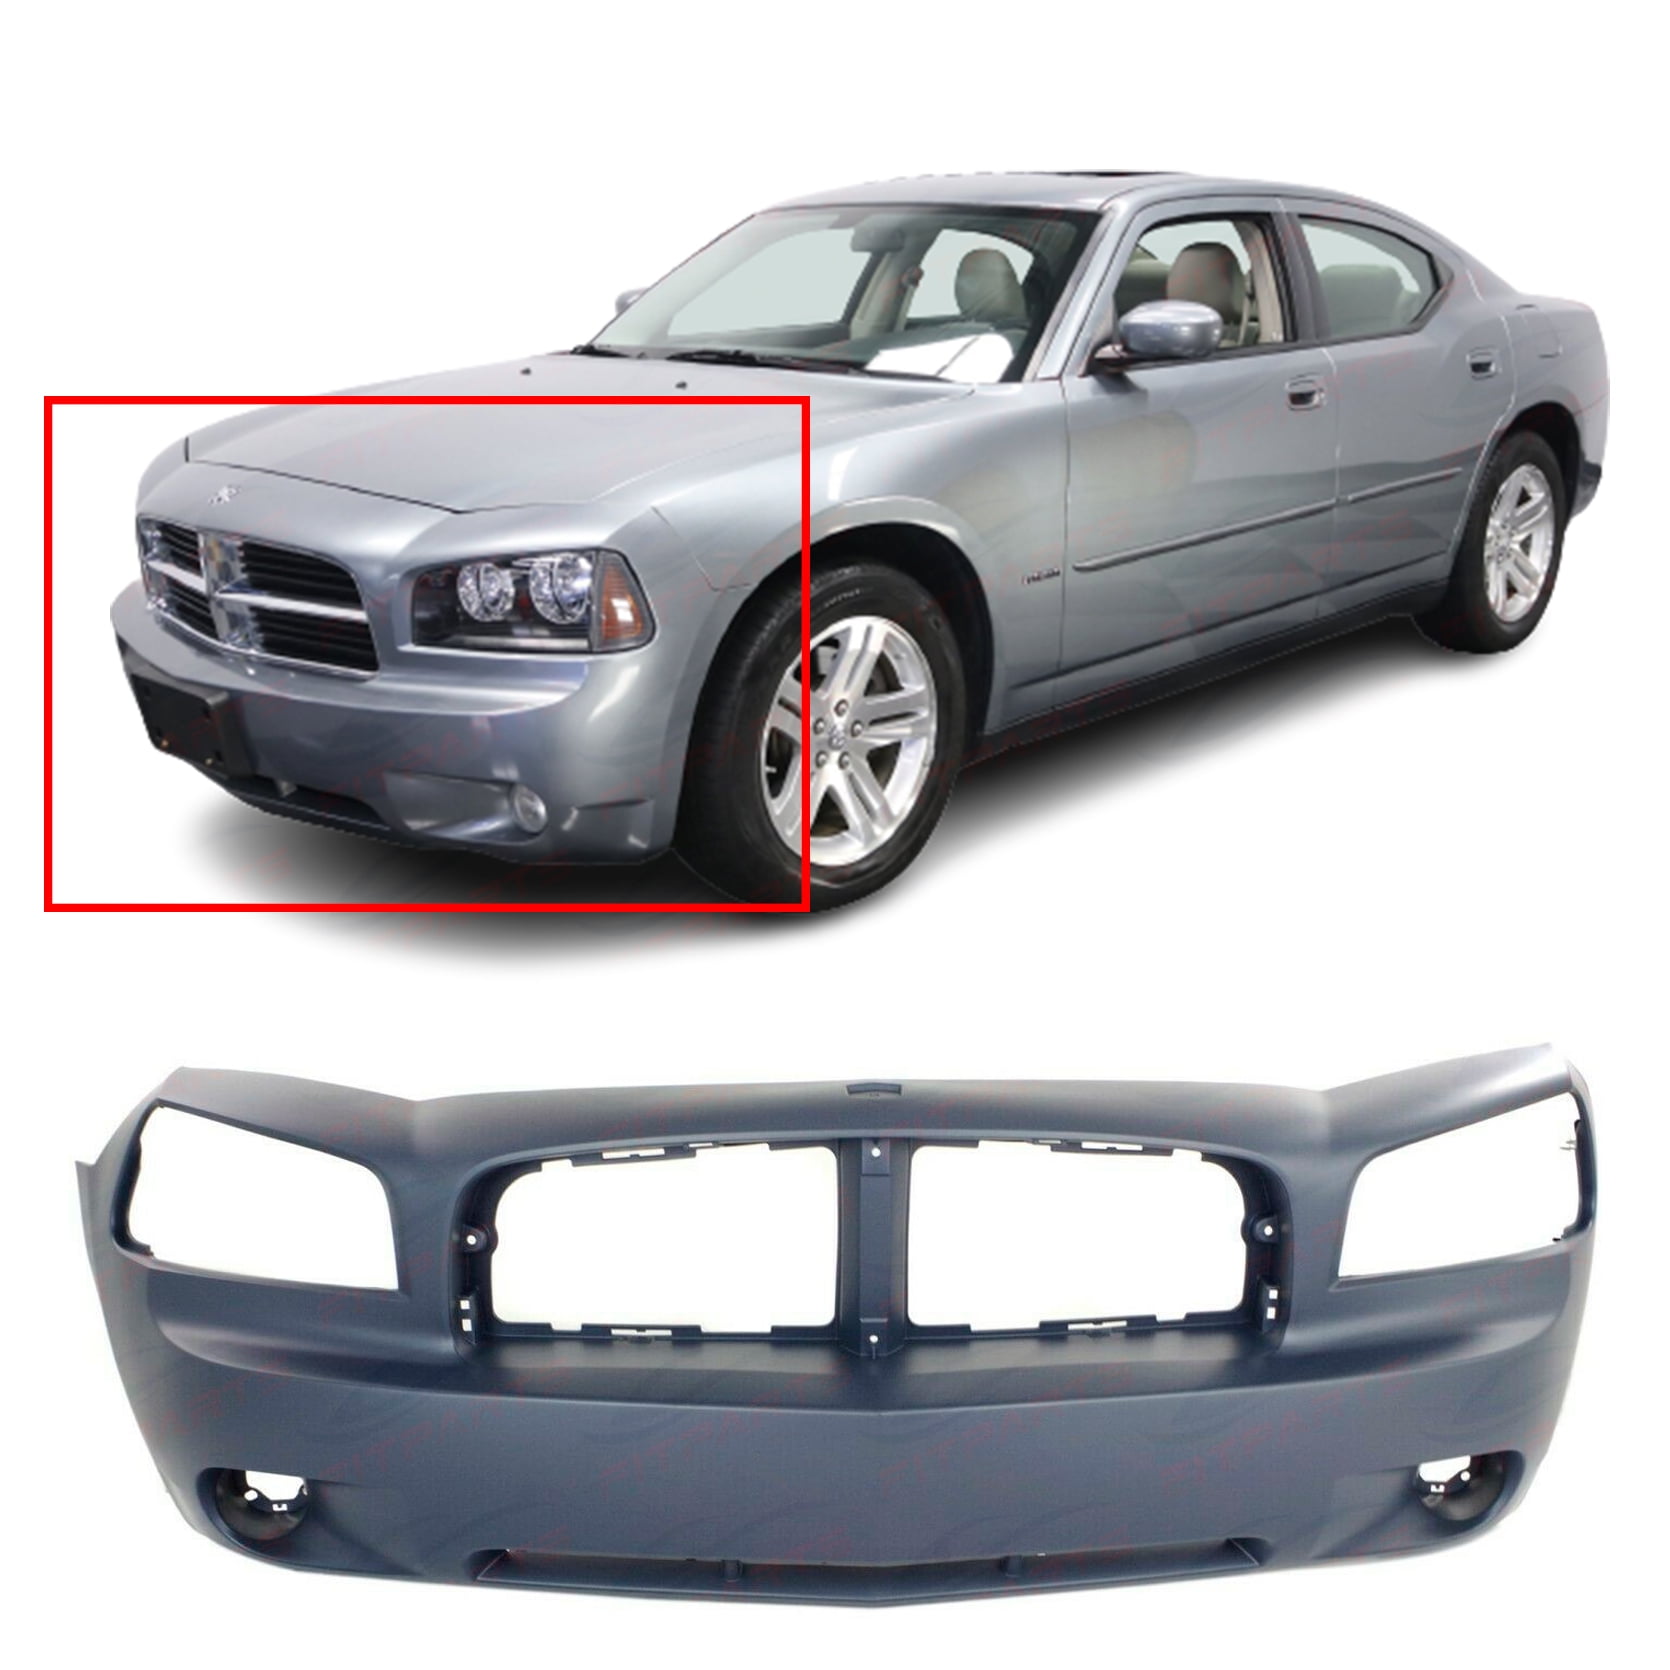  FitParts Compatible with Front Bumper Cover 2006-2008